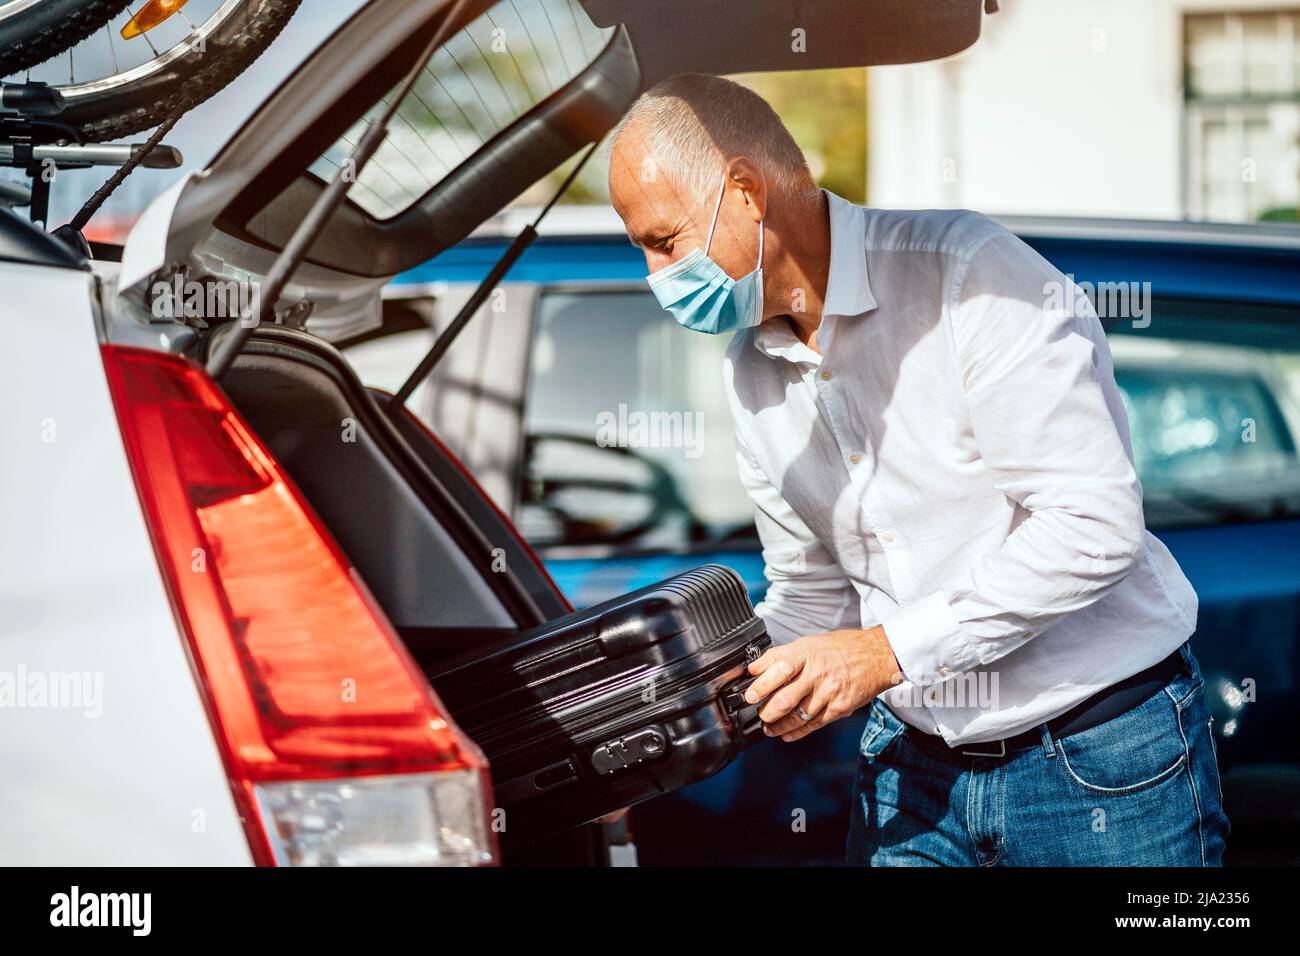 A taxi or Uber driver in mask puts the luggage into the trunk of his car Stock Photo